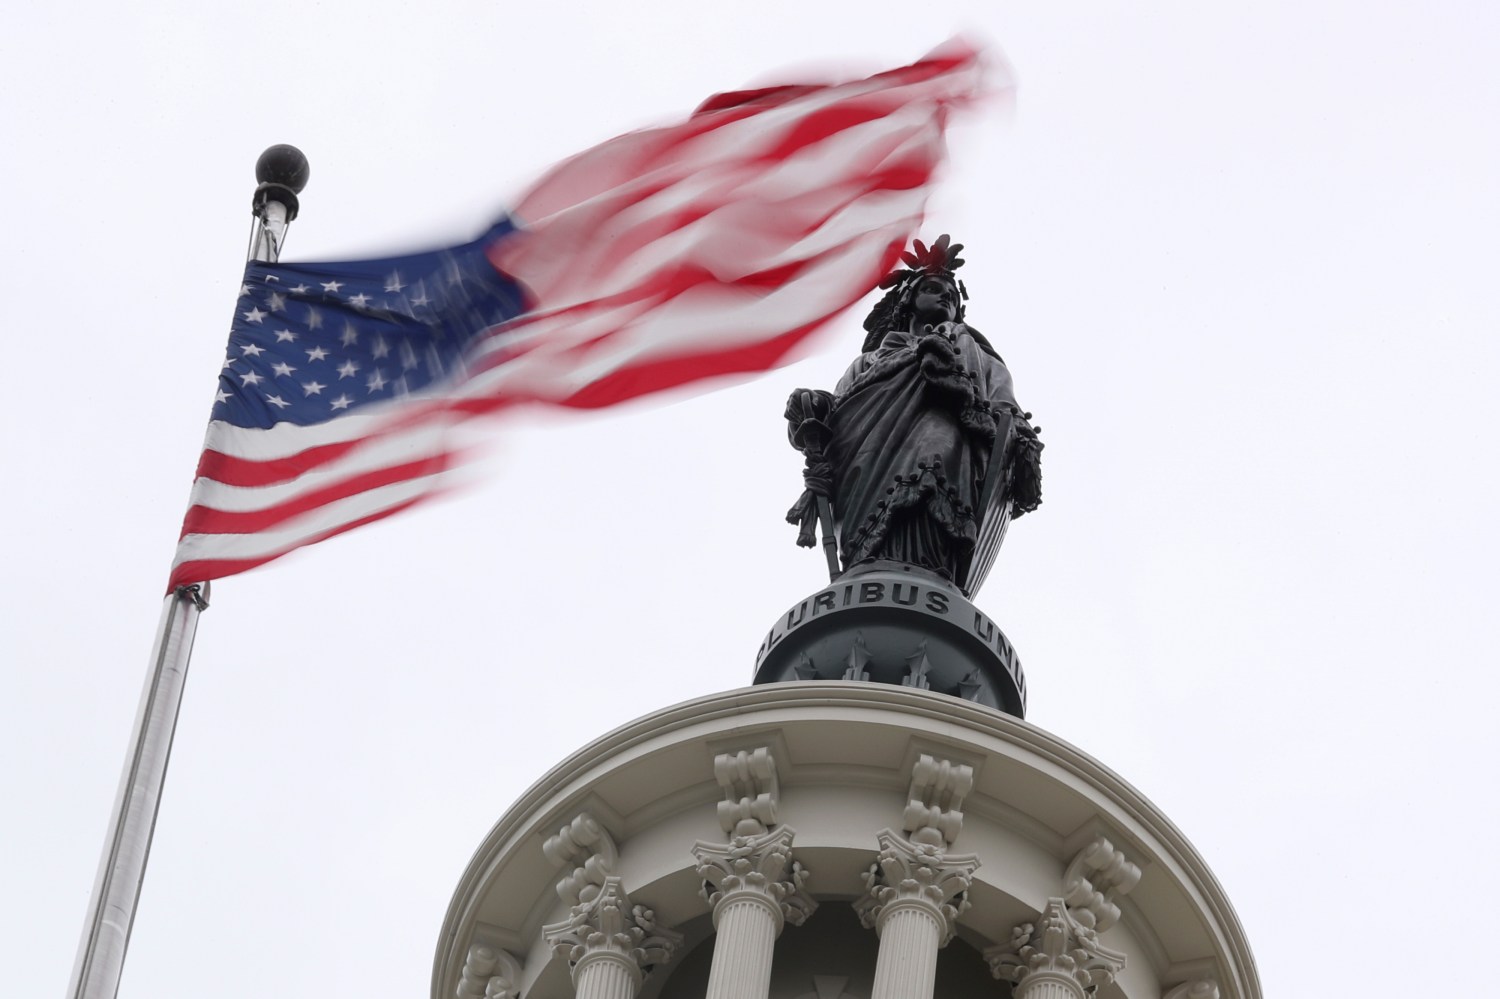 The U.S. flag flies near the Statue of Freedom atop the U.S. Capitol in Washington, U.S. November 2, 2018. REUTERS/Jonathan Ernst - RC145C0624F0